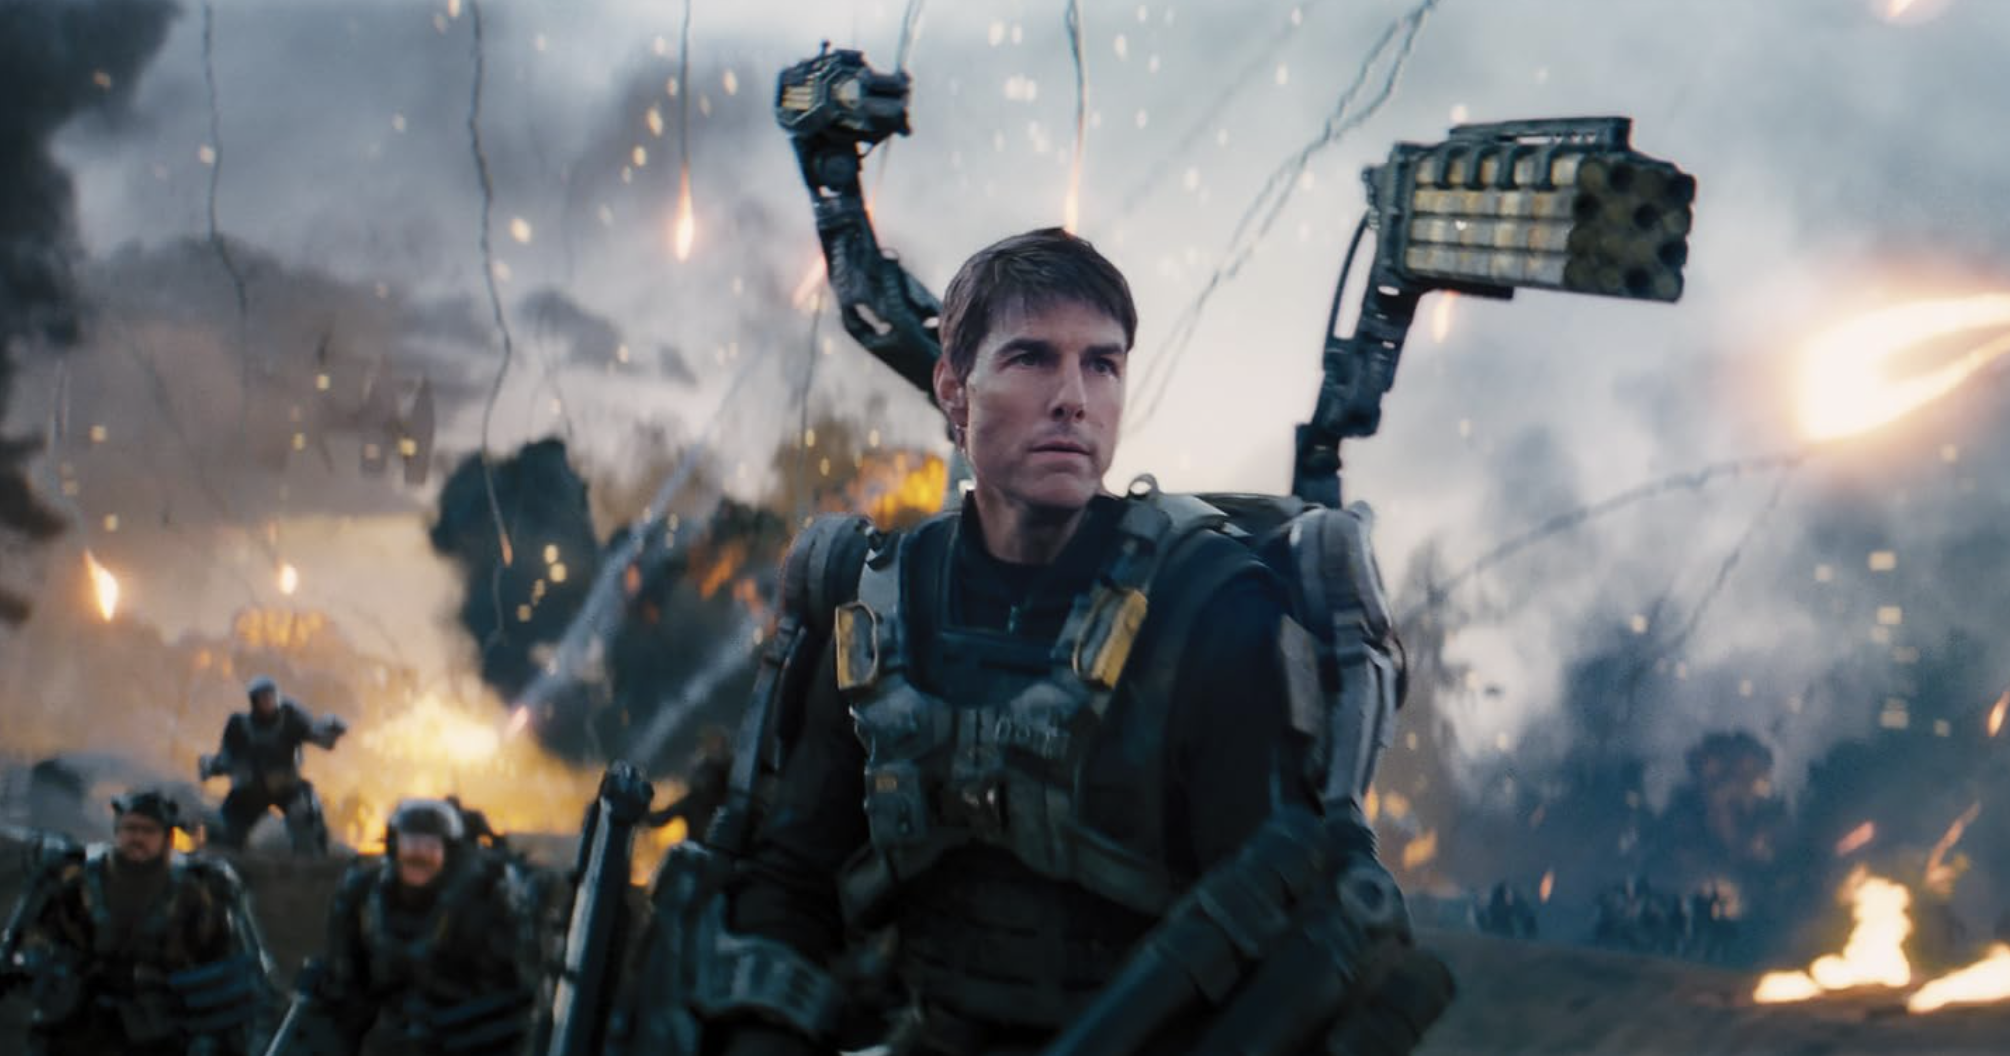 <p>In this incident, it wasn't technically Tom Cruise who performed the potentially disastrous stunt. During an appearance on<a href="https://www.youtube.com/watch?v=73FktIOpsJ0&embeds_referring_euri=https%3A%2F%2Fwww.hollywoodreporter.com%2F&source_ve_path=MjM4NTE&feature=emb_title"> Conan O'Brien's</a> talk show, Emily Blunt, Tom Cruise's co-star in “Edge of Tomorrow,” shared an anecdote about causing a stunt accident on set. "I drove us into a tree and almost killed Tom Cruise," Blunt revealed. Recounting the incident, she shared that during a driving scene, Cruise quietly muttered to her, "Brake, brake, brake. Brake. Brake, brake, brake... Oh, God. Brake, brake, brake. Brake hard! Brake hard!" However, Blunt's delayed response led to an unfortunate outcome as she drove them into a tree, putting Cruise's life in danger. Reflecting on the incident, Blunt admitted to initially dismissing Cruise's instructions, considering them as mere unpleasant advice. Nevertheless, both actors were able to find humor in the situation afterward.</p>